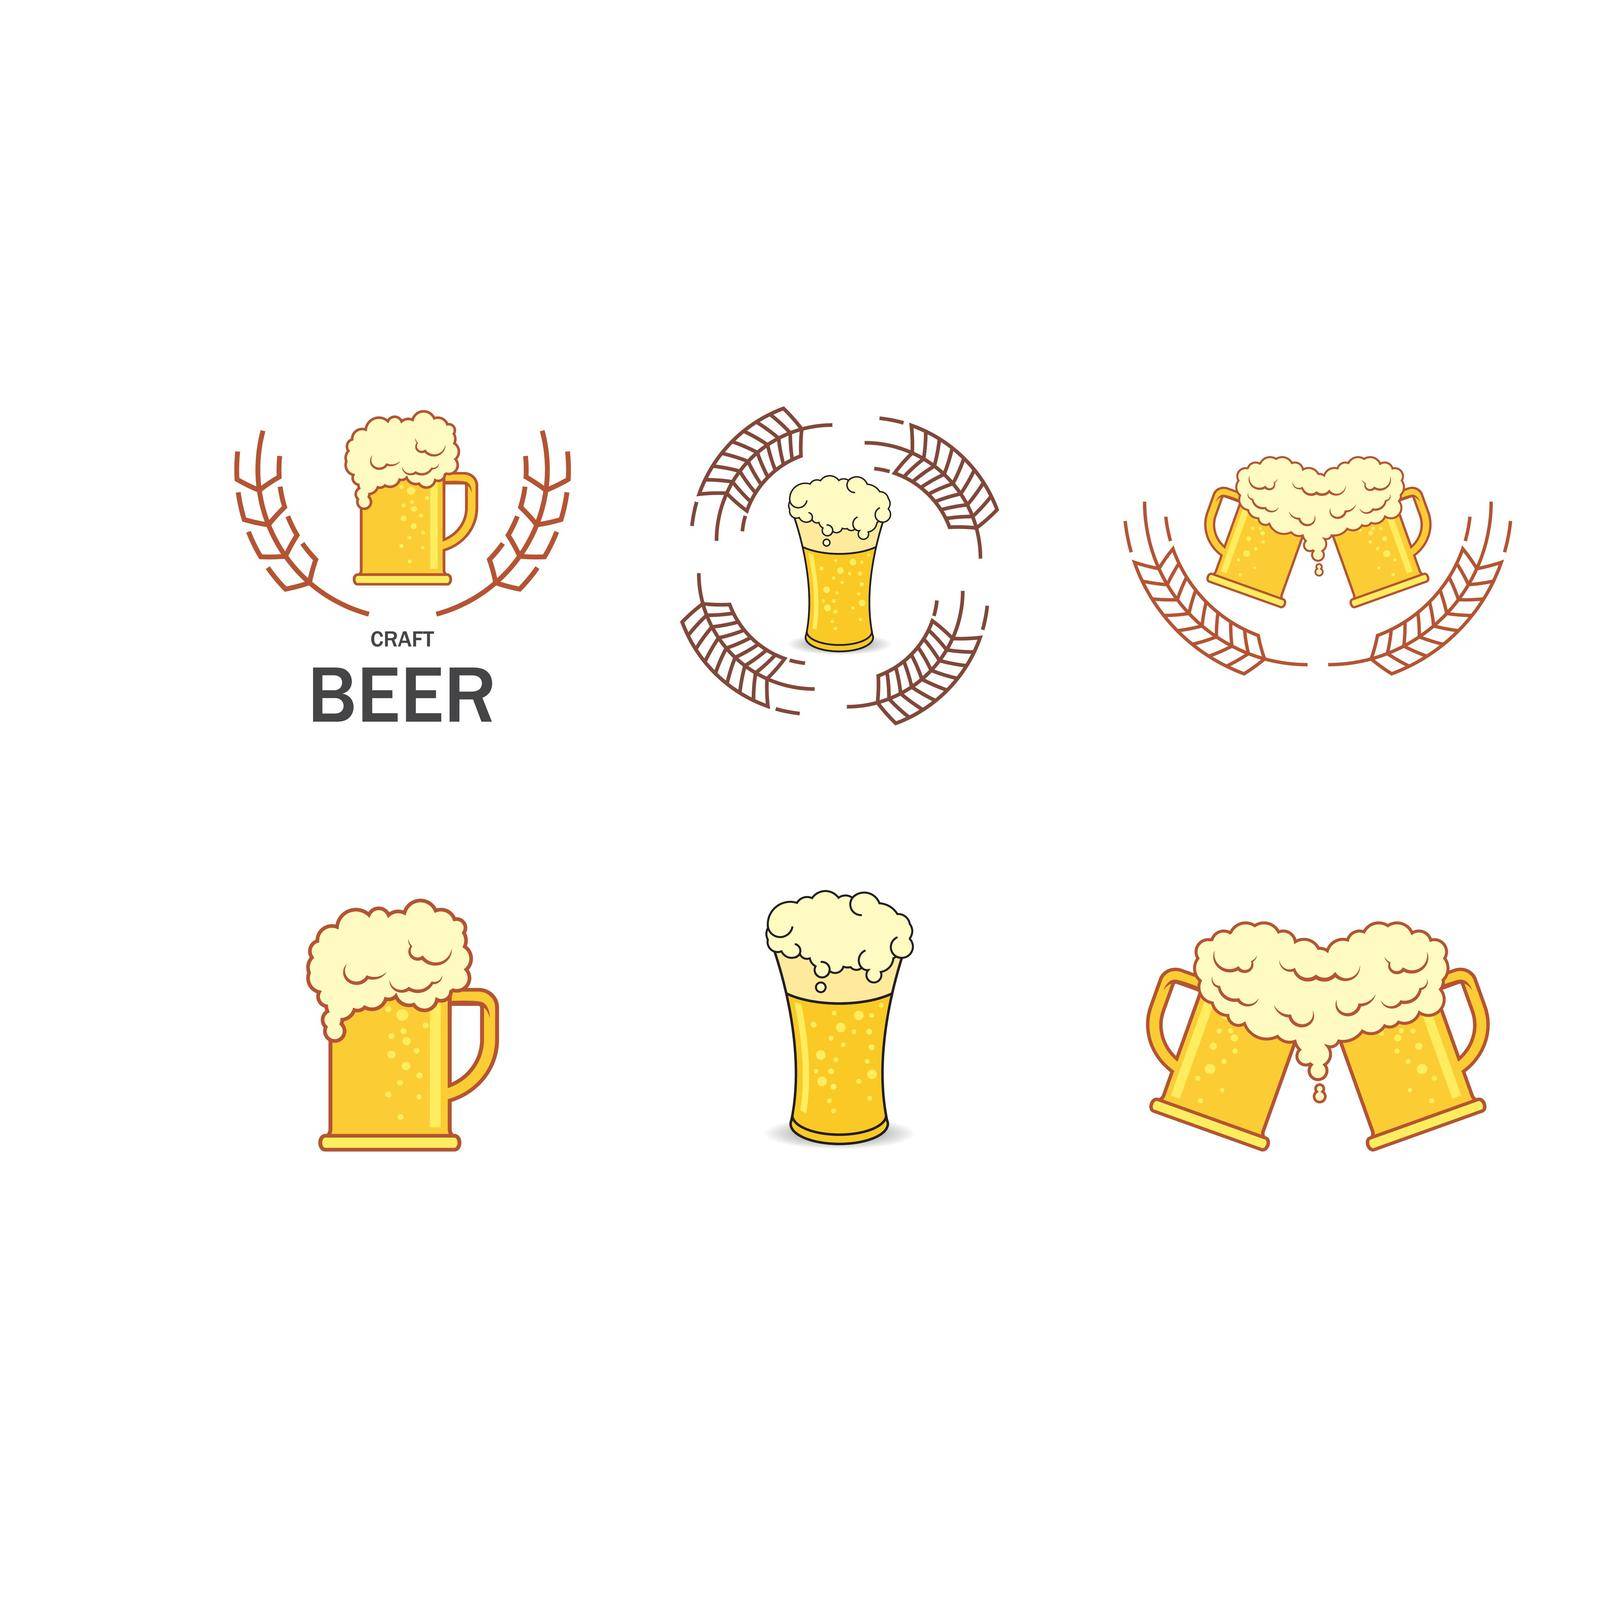 Beer craft logo vector by awk